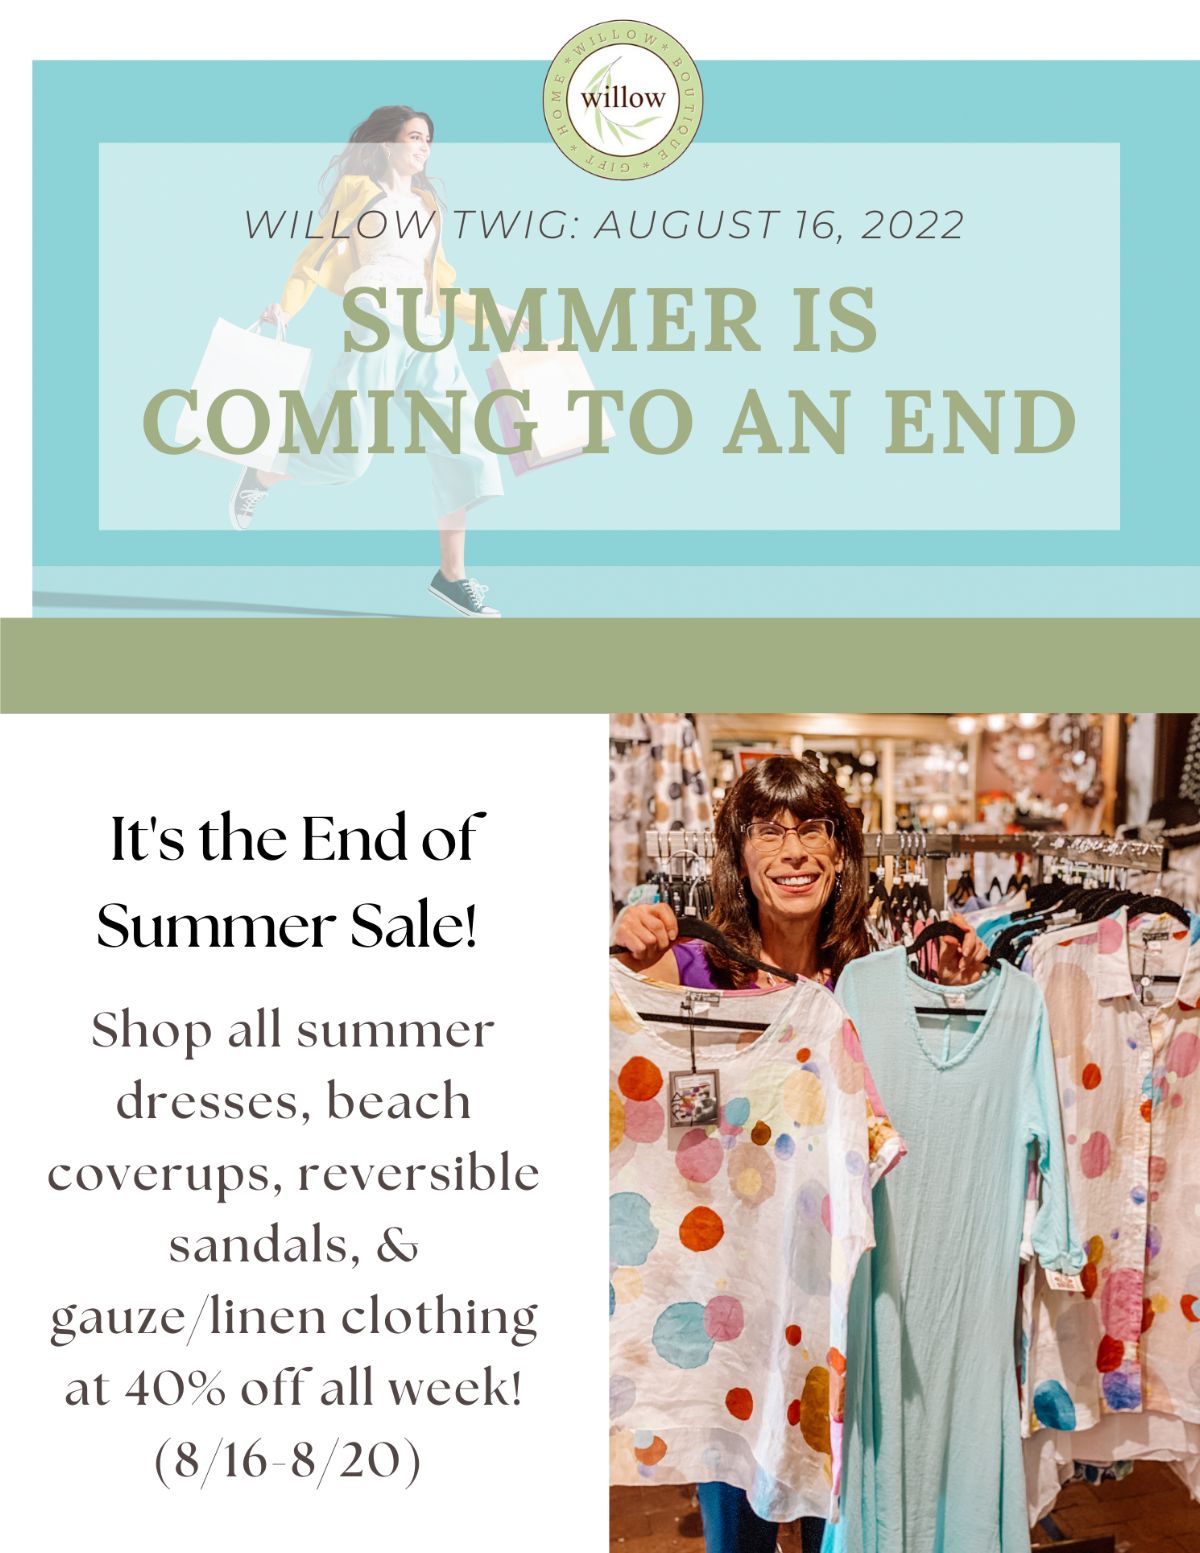 End of Summer Sale - 40% Off Select Styles – Willow Gift & Home